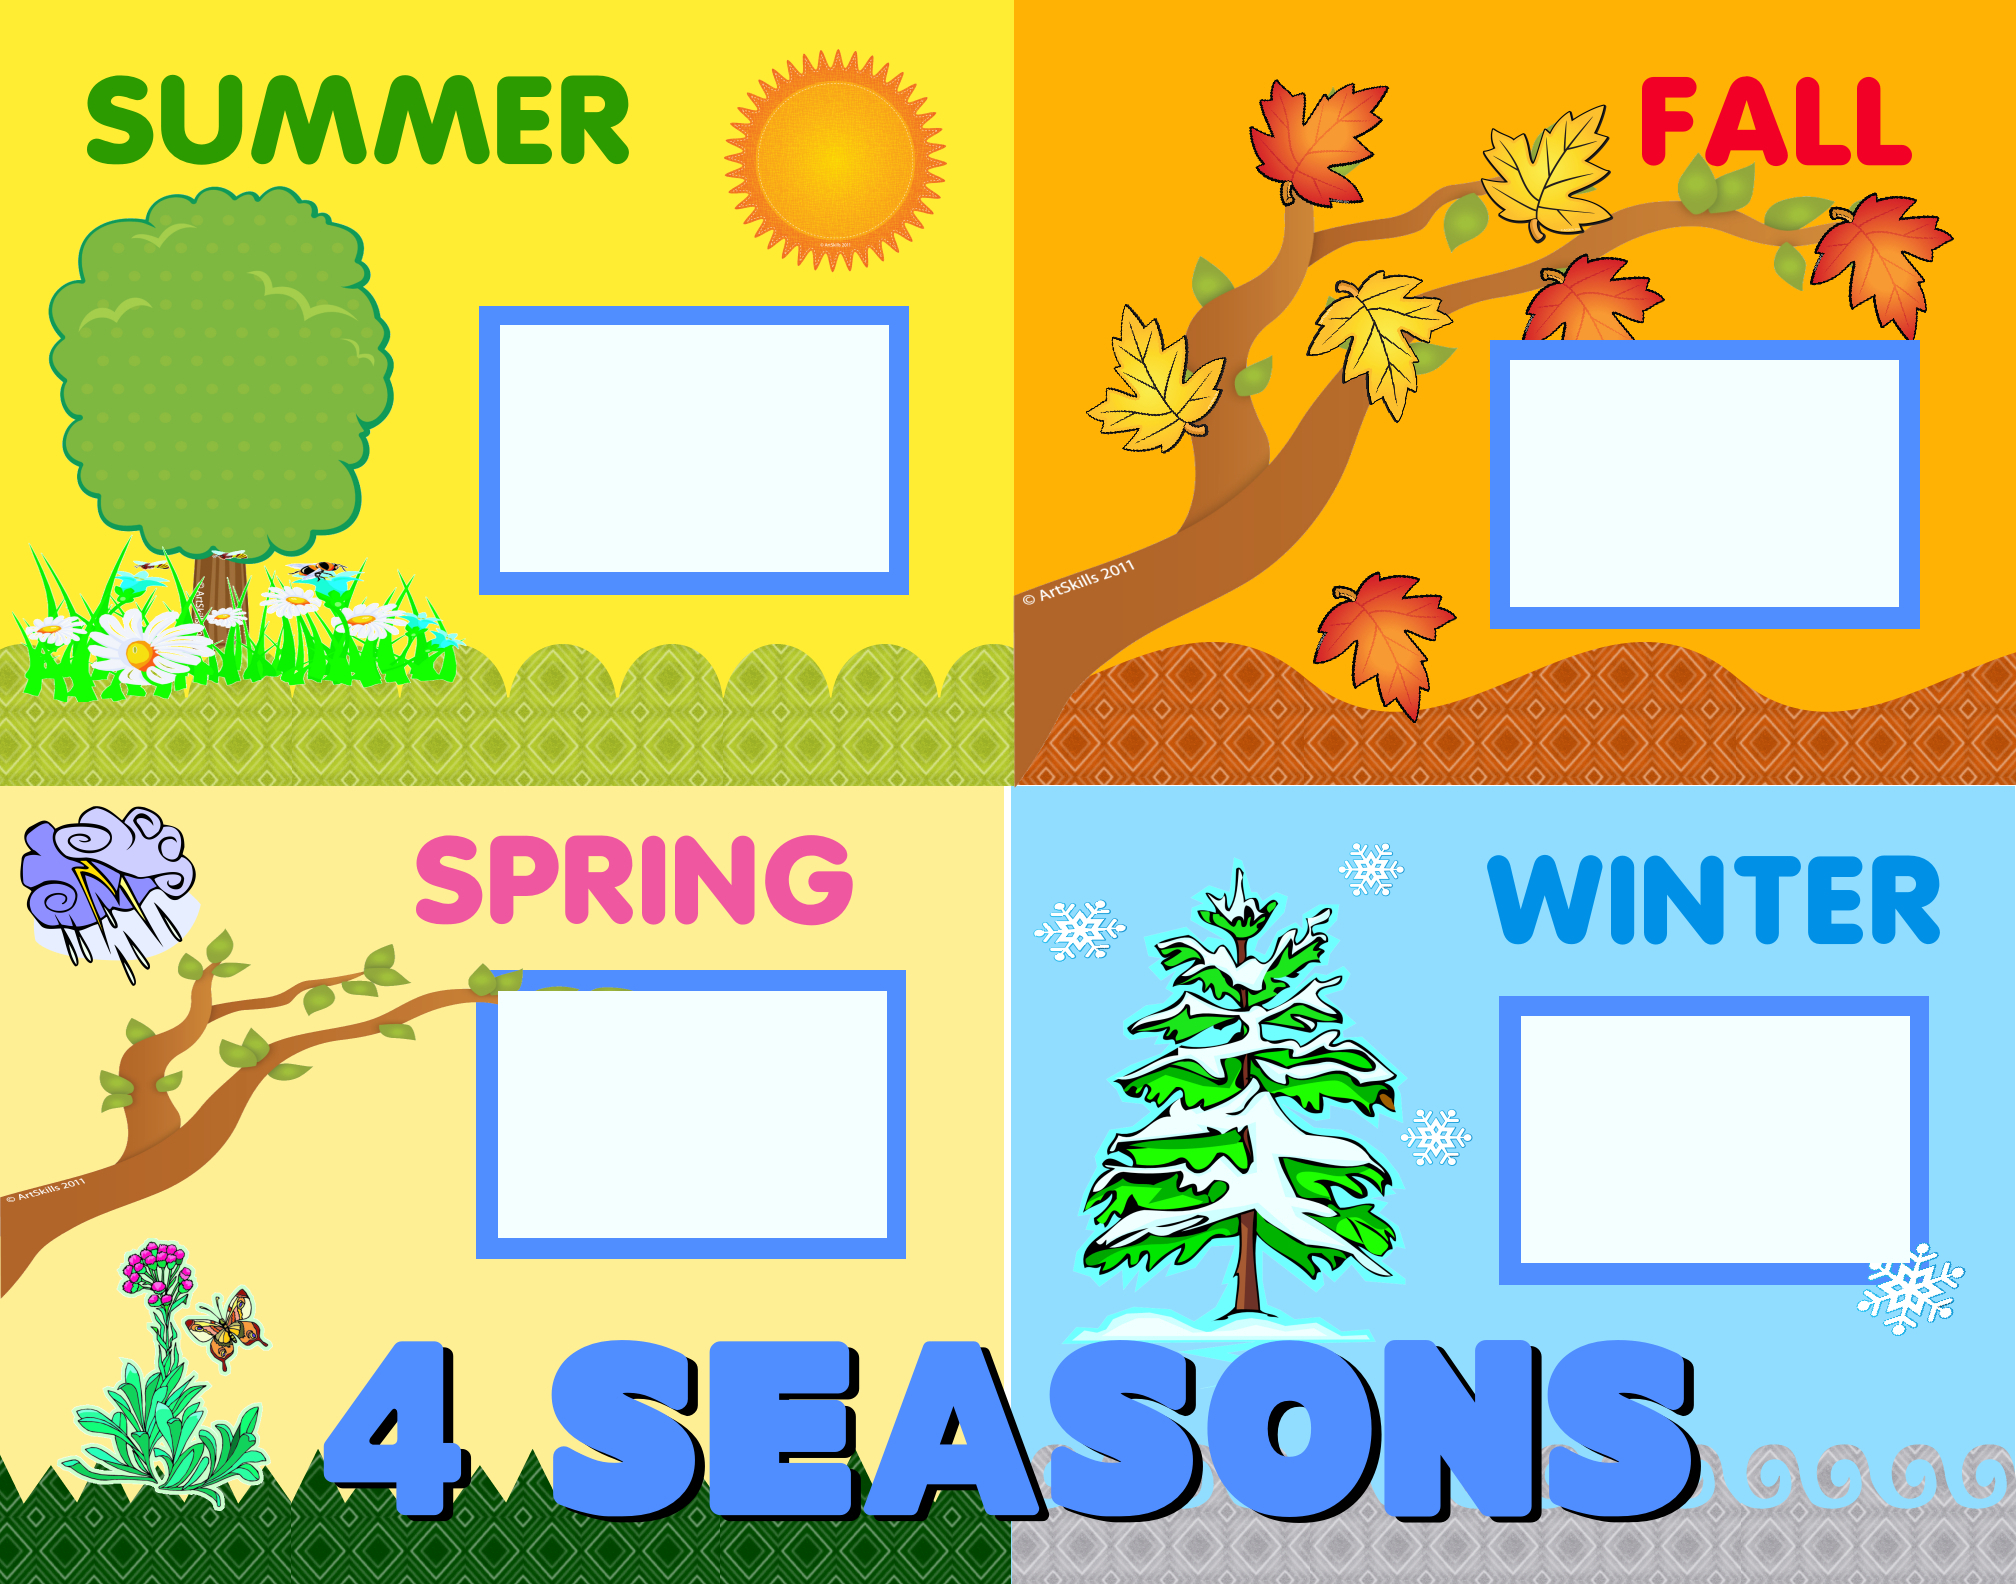 Create A 4 Seasons Poster   School Poster   Educational Poster Ideas